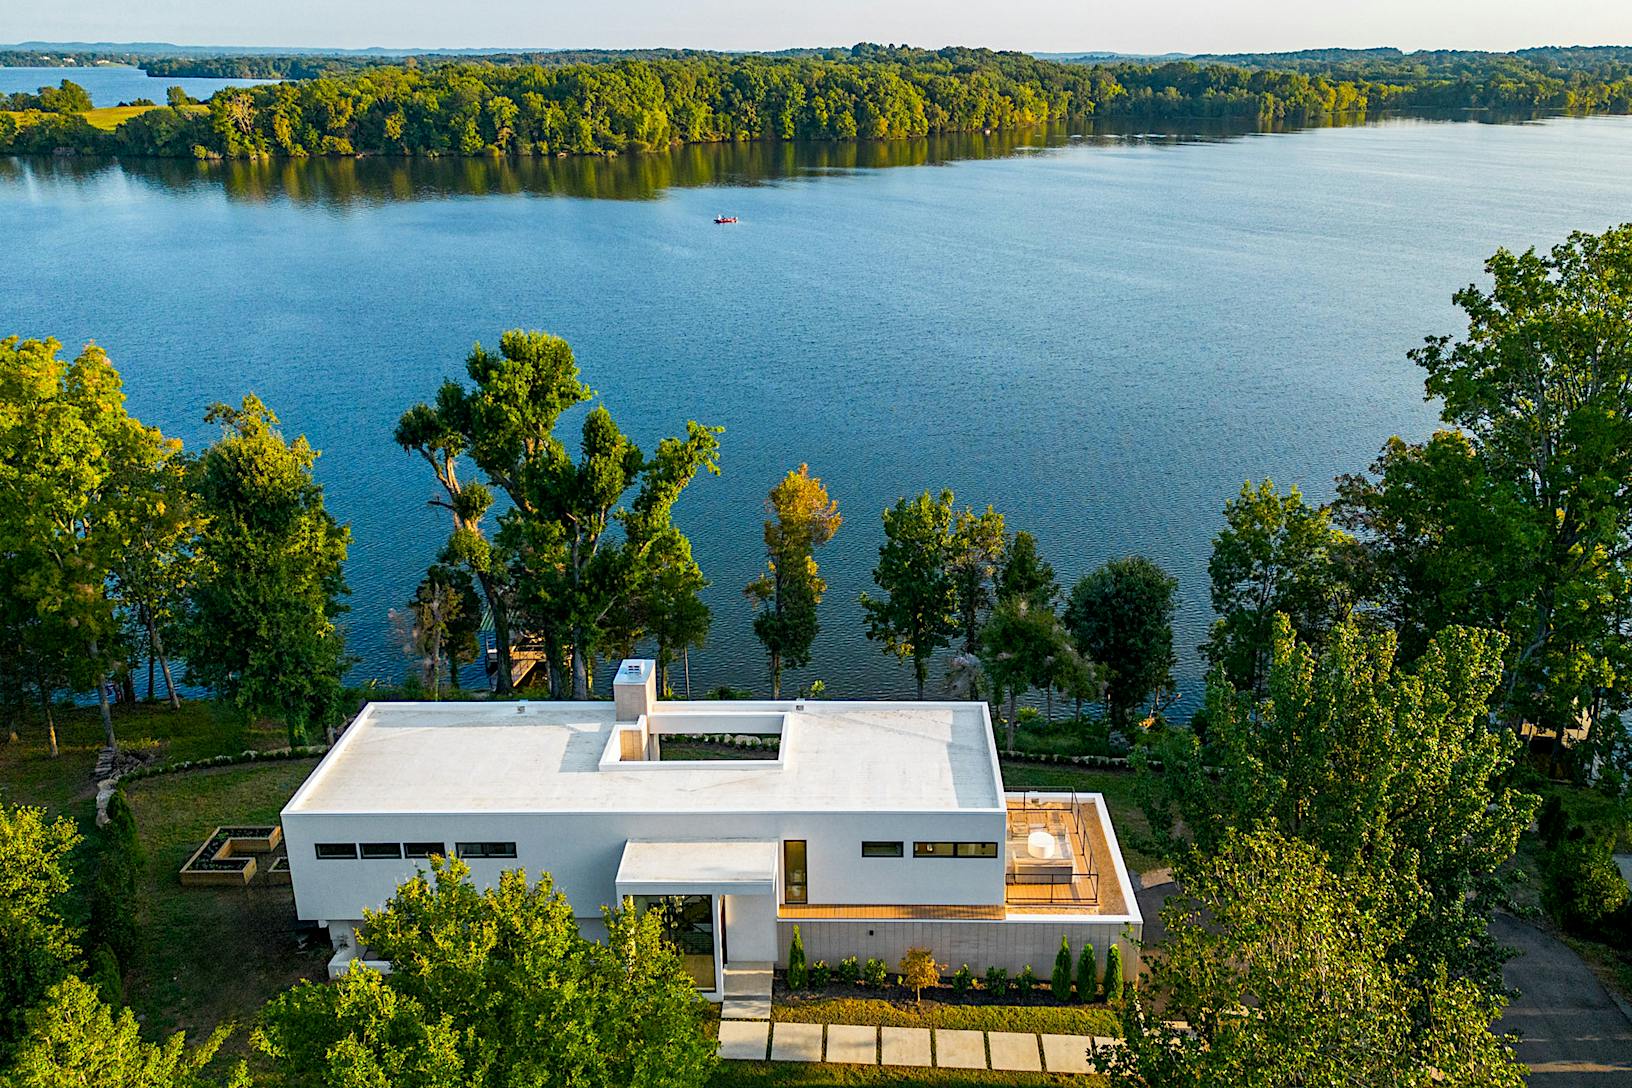 Aerial view of a modern, white flat-roofed house surrounded by lush trees, located near the edge of a large lake.